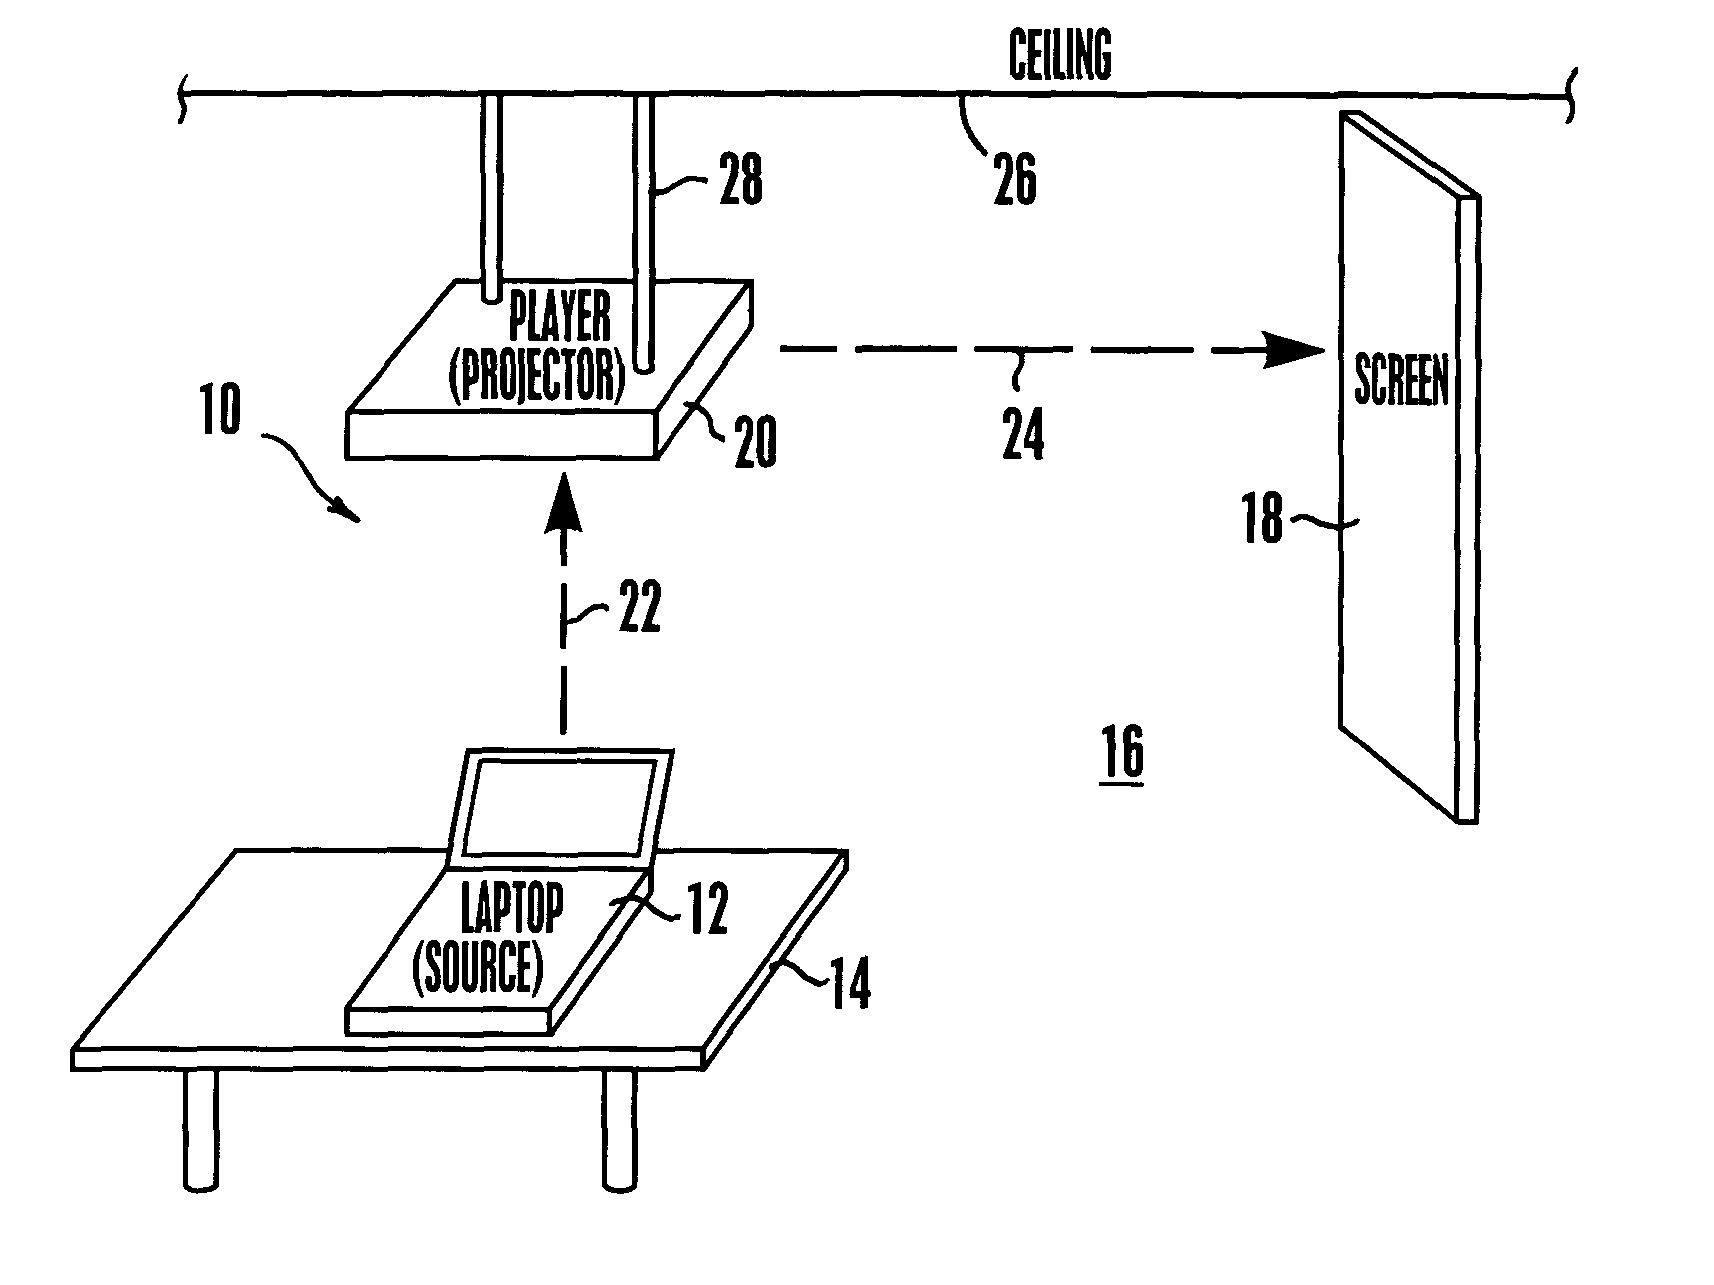 Method and system for wireless digital video presentation